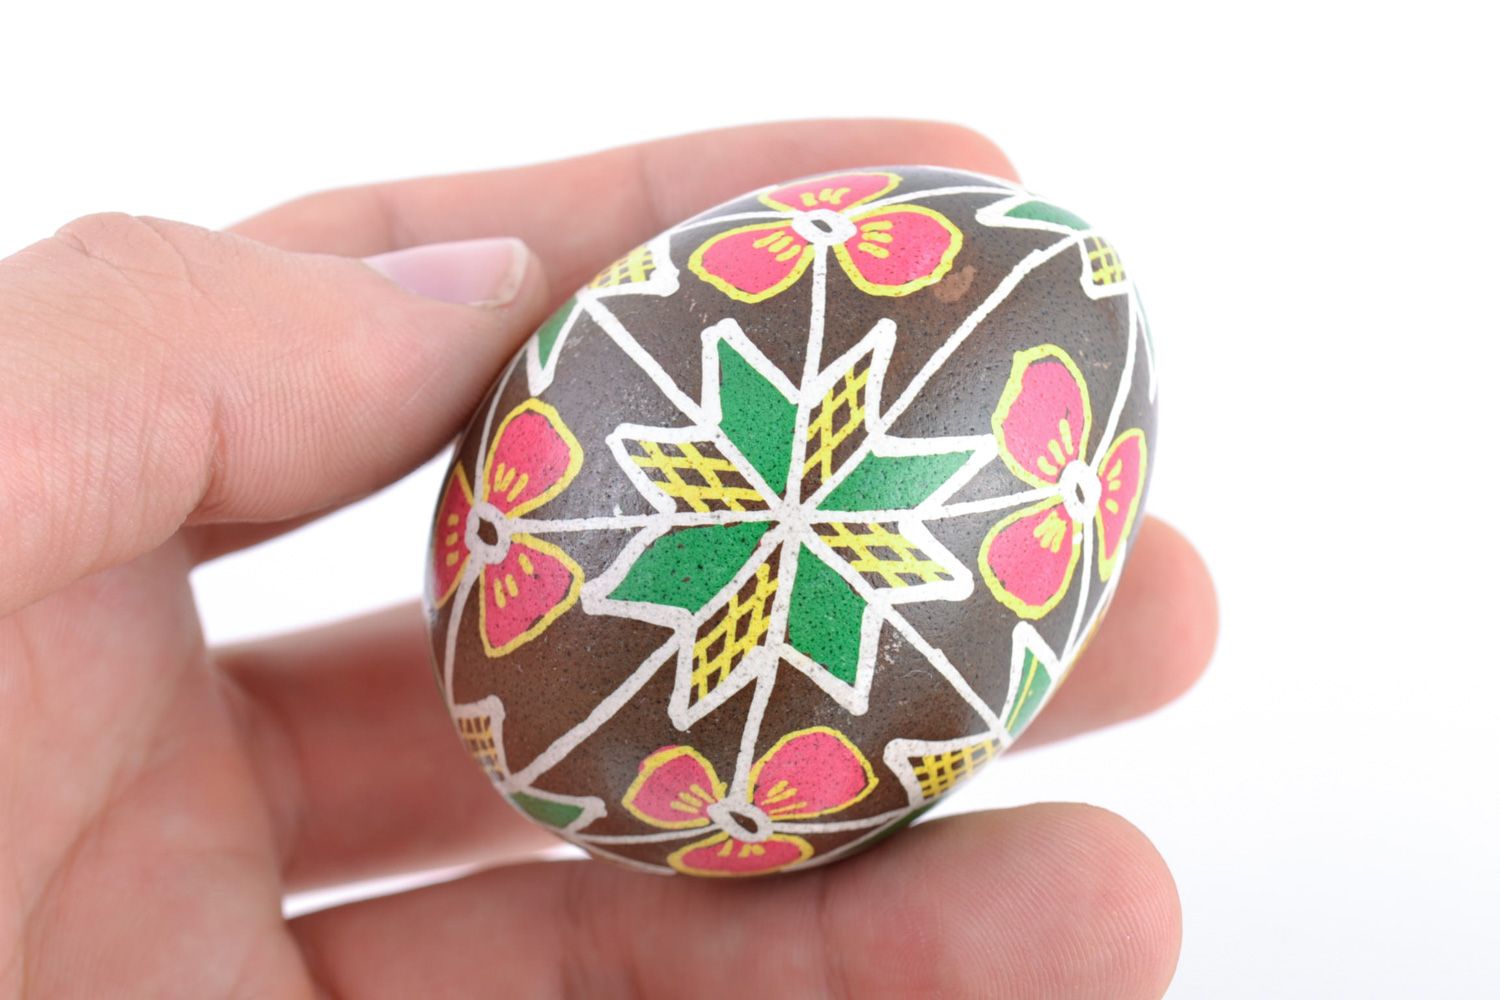 Handmade traditional decorative painted egg with floral ornament Easter decor photo 2